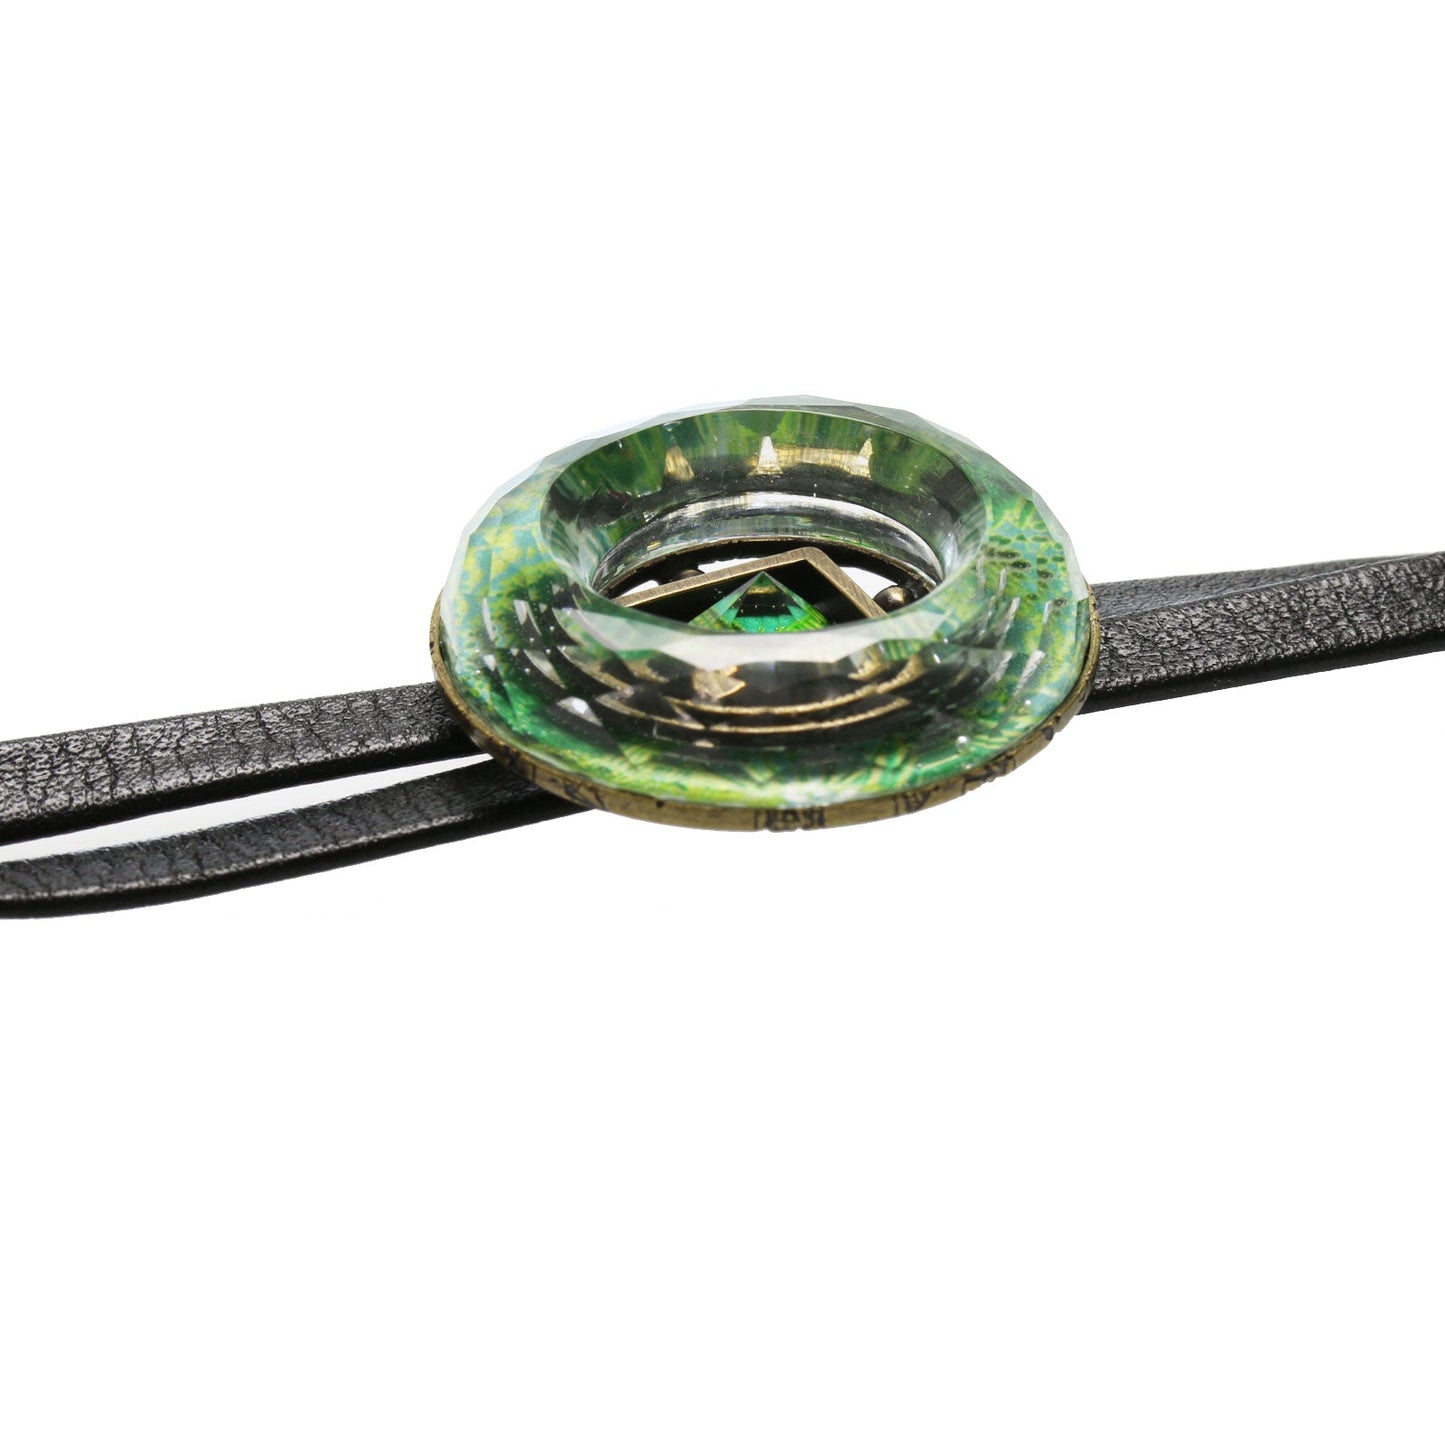 Leather Strap Bolo Tie Green Lily Round TAMARUSAN